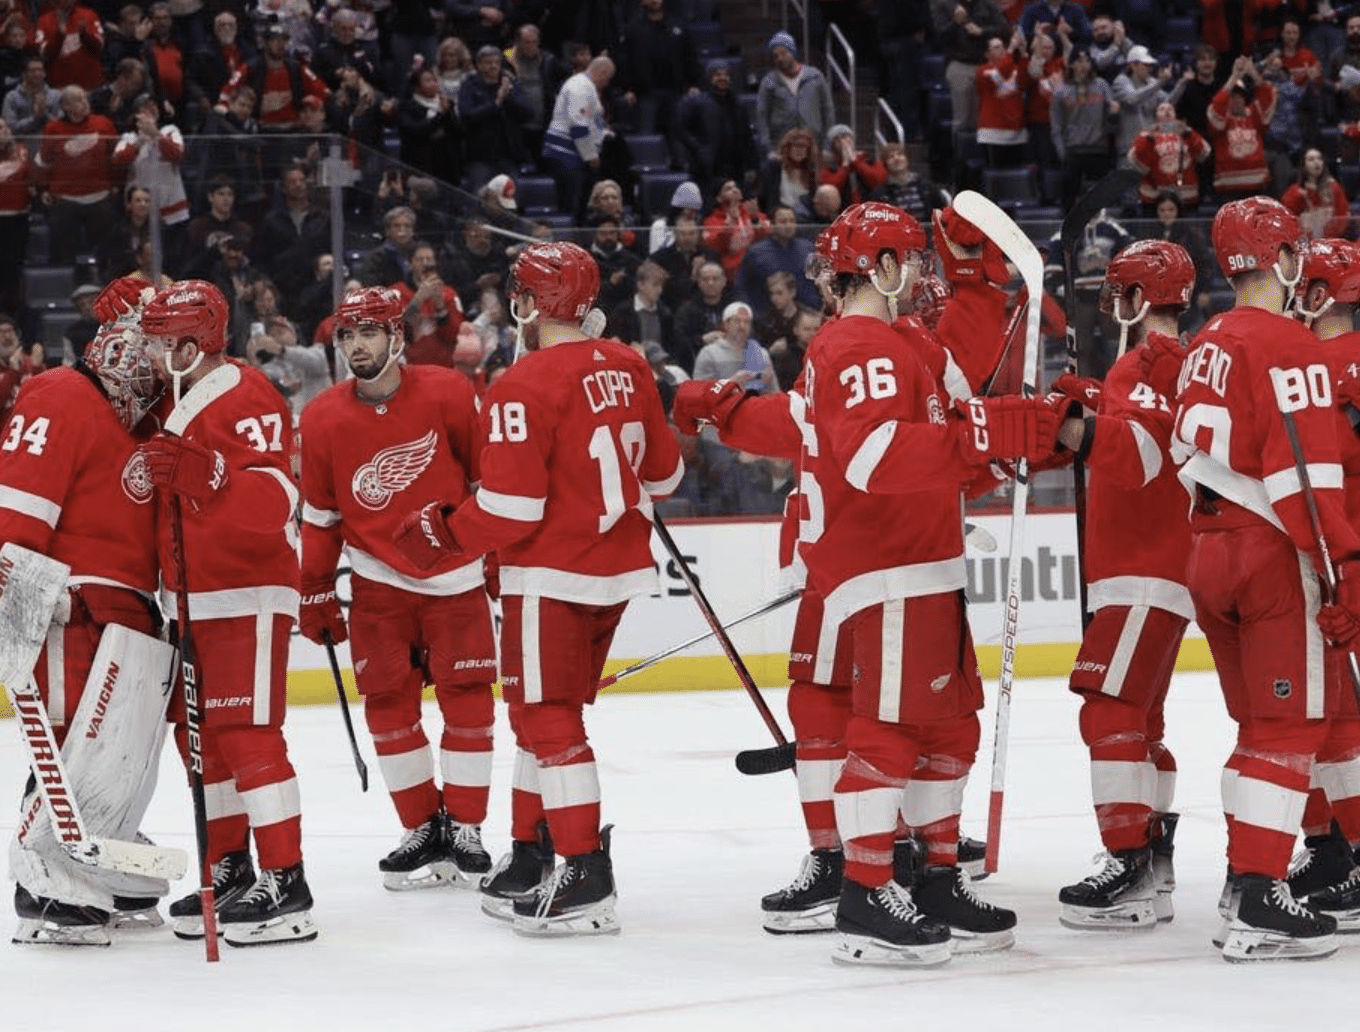 Detroit Red Wings praise their fans Photo Credit - Rick Osentoski - USA Today Sports